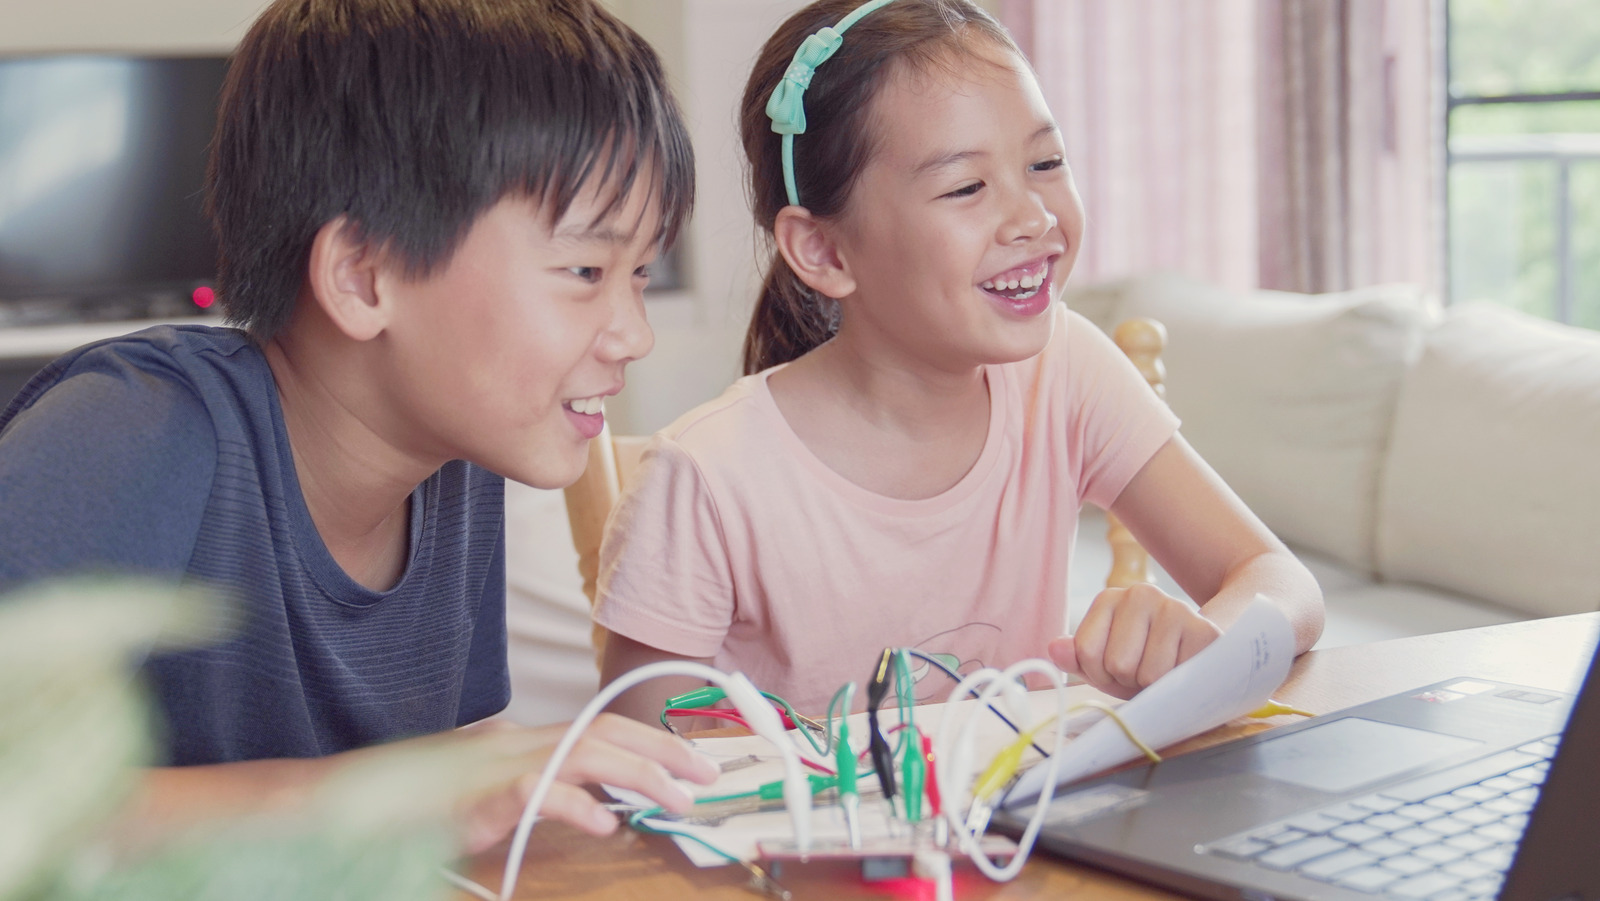 What Are Makey Makey Apps & What Devices Can You Run Them On?